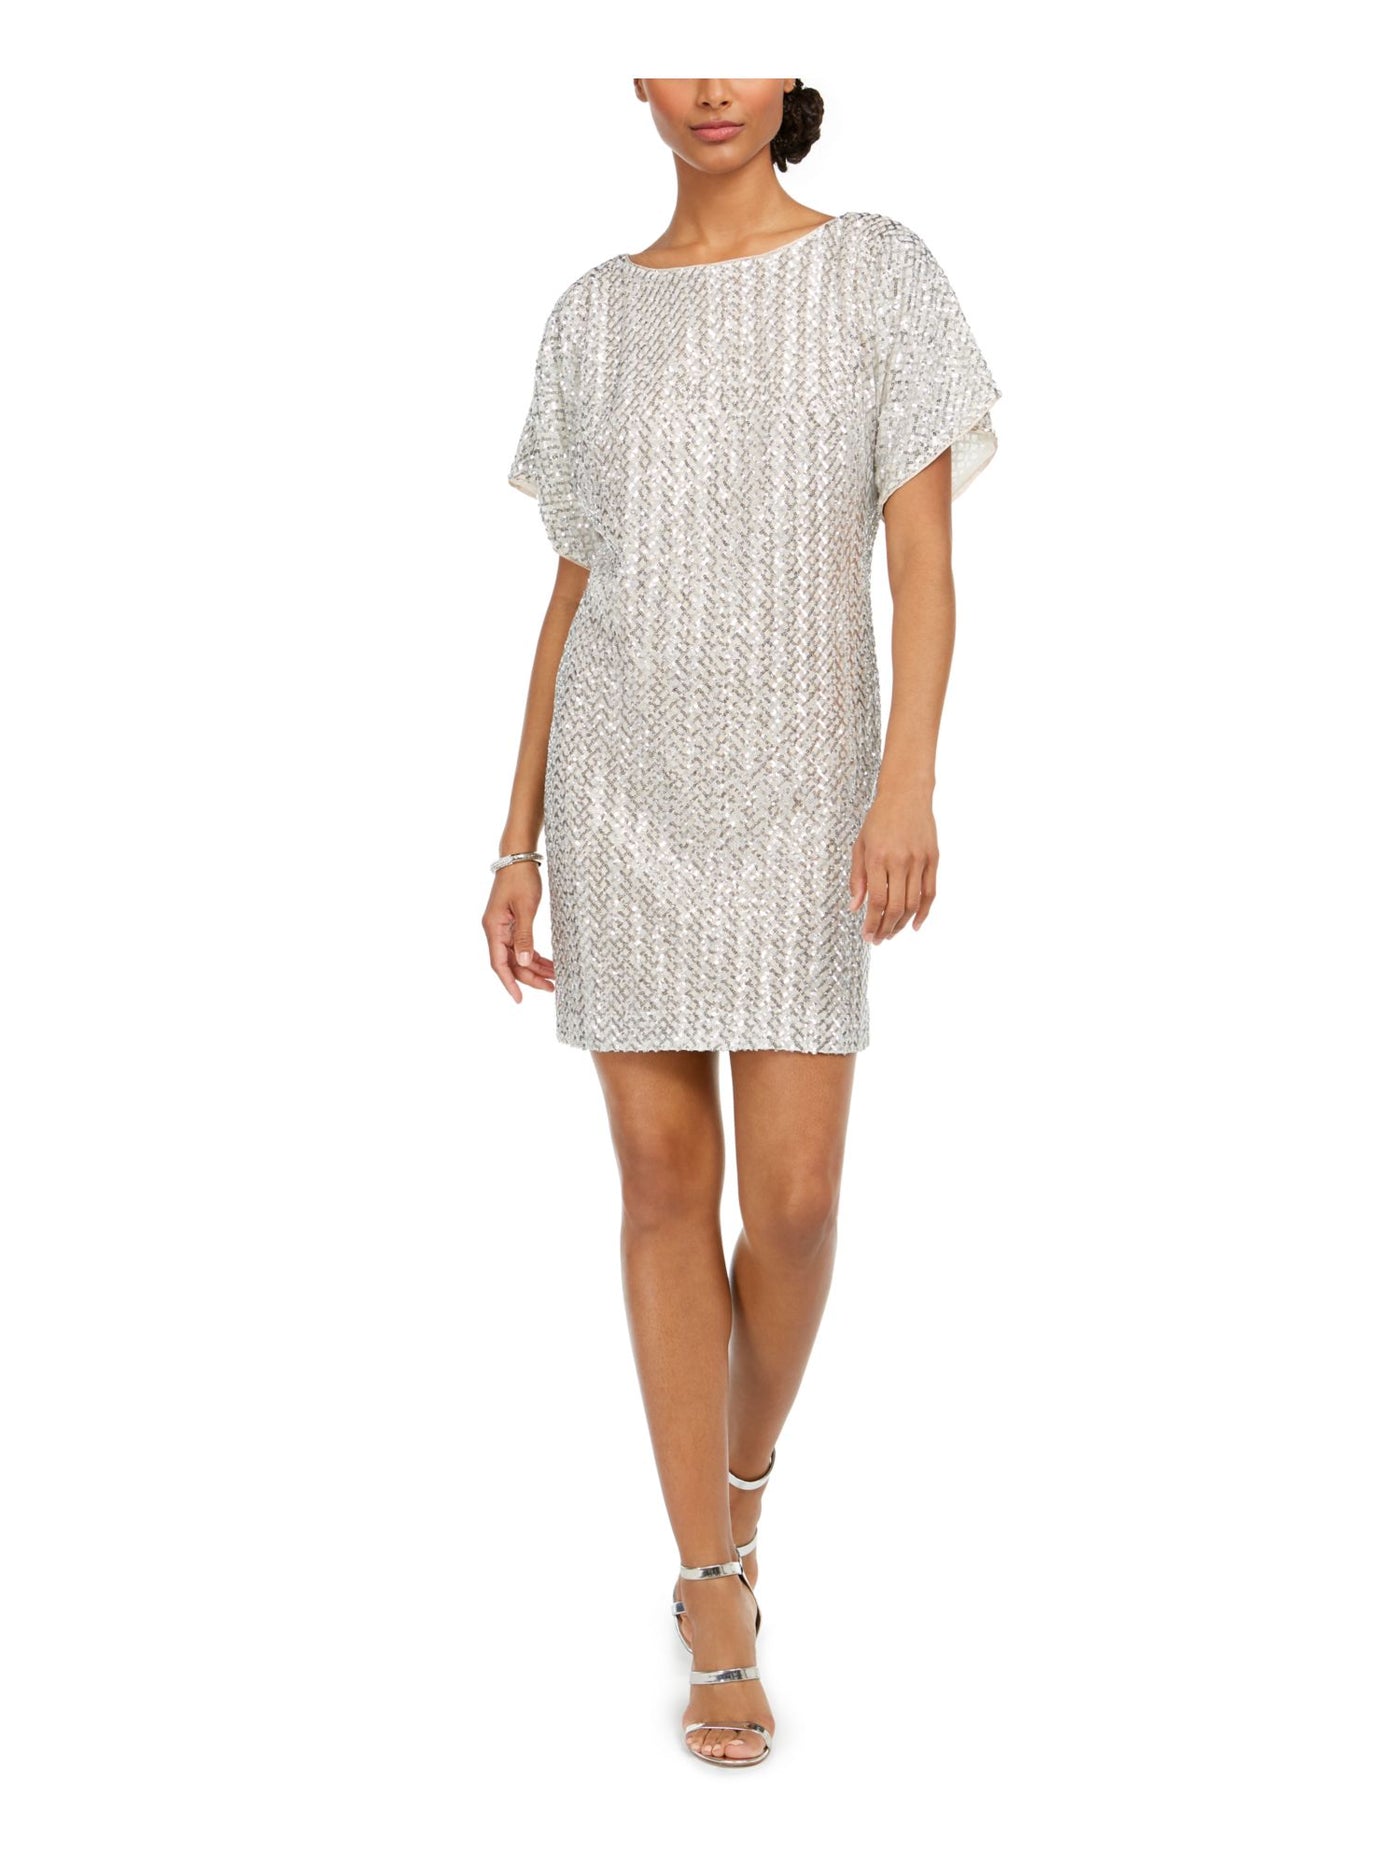 VINCE CAMUTO Womens White Stretch Sequined Keyhole-back Short Sleeve Round Neck Short Cocktail Shift Dress 2